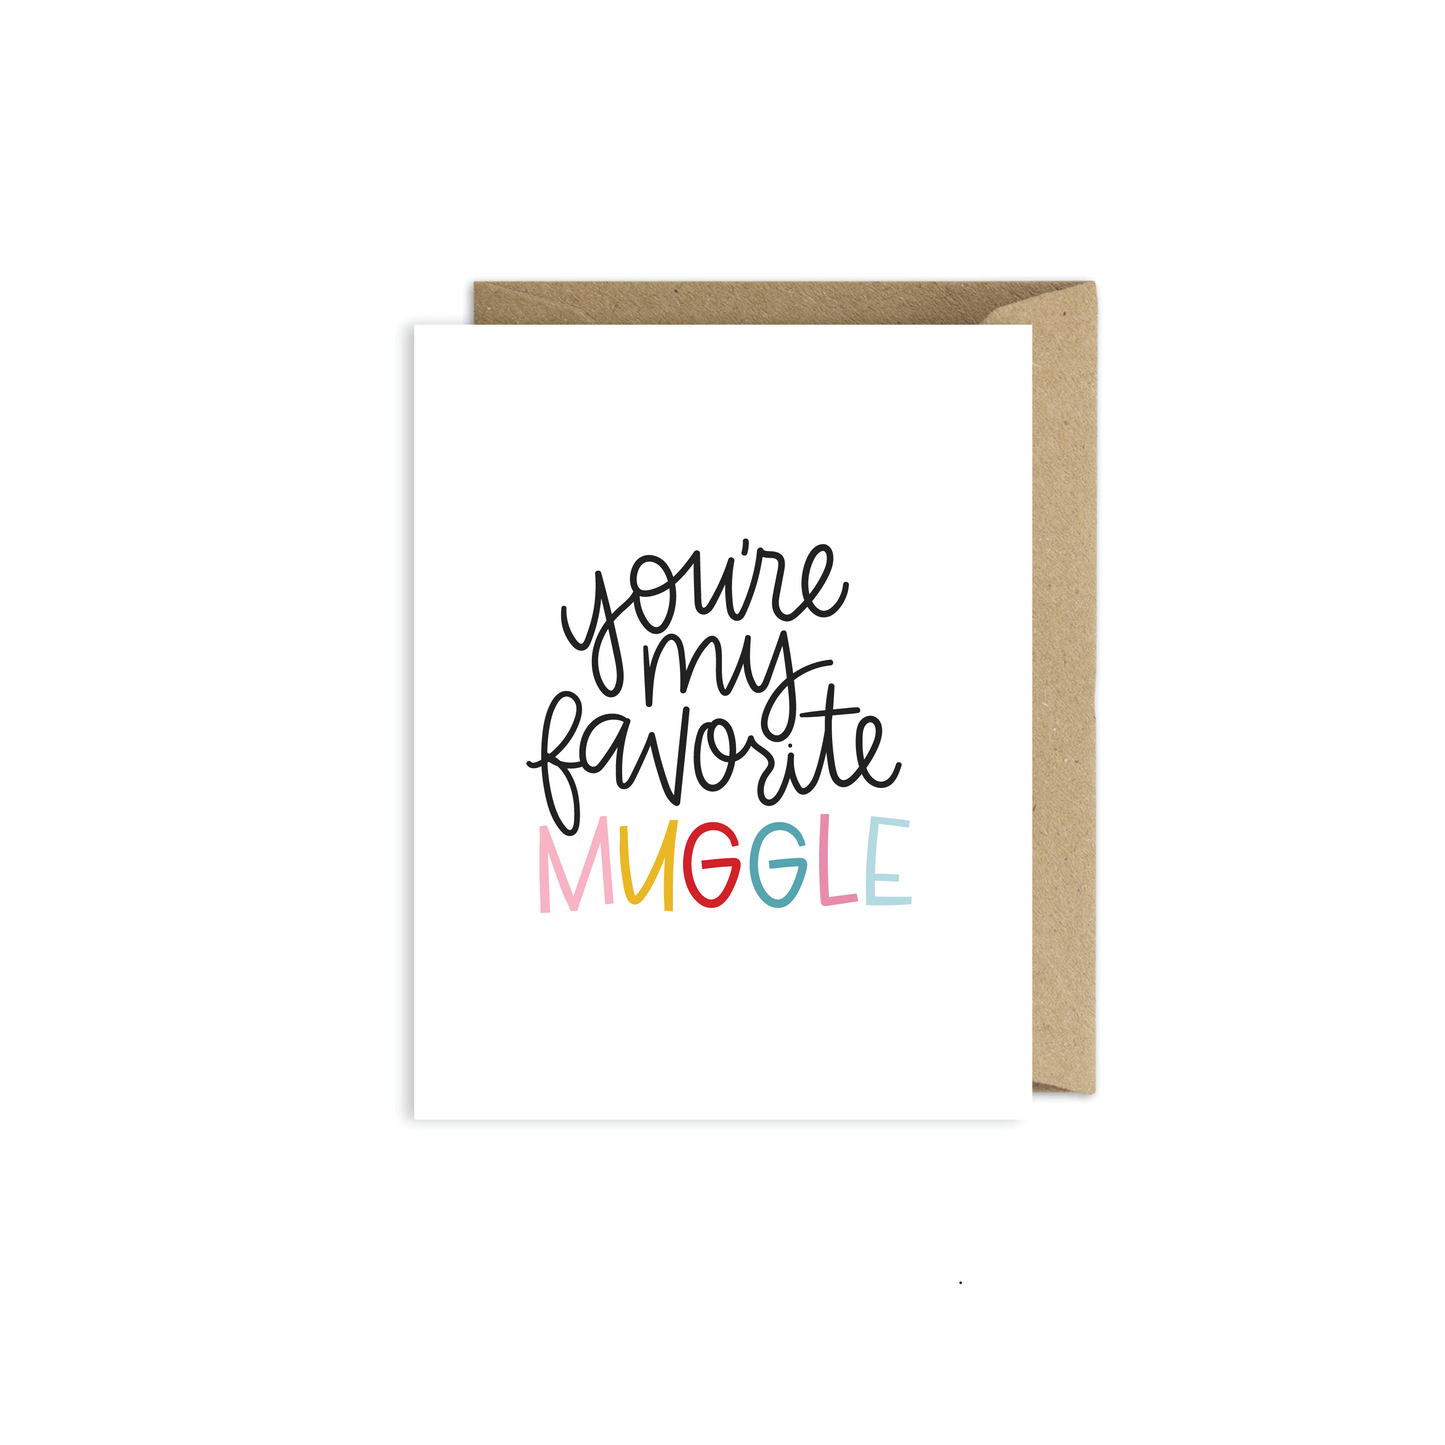 Harry Potter Inspired Love Card - You're My Favorite Muggle